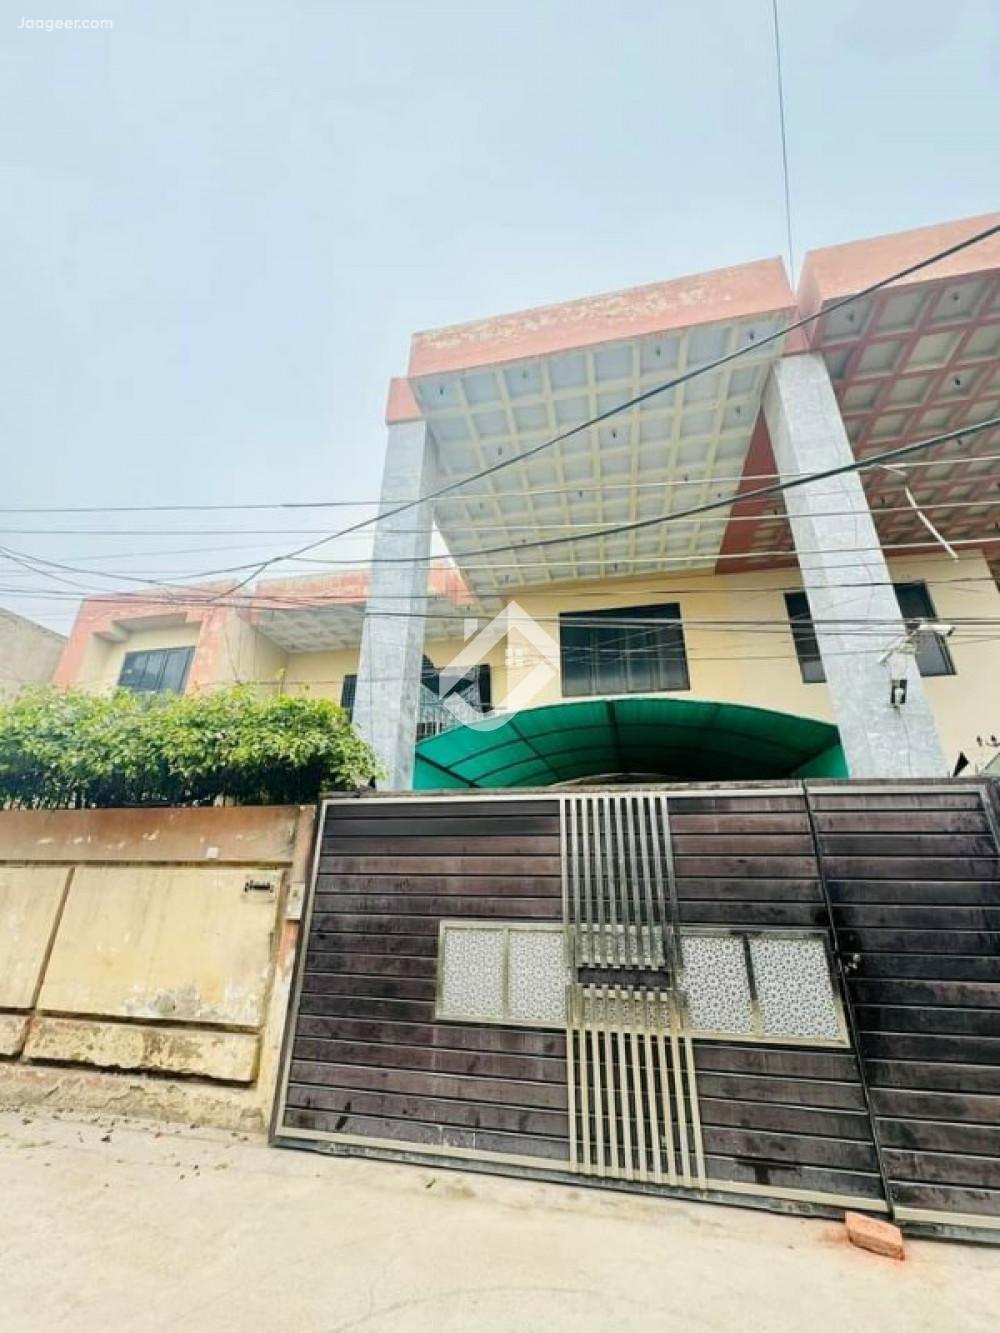 View  10 Marla Double Storey House For Sale At Bosan Road   in Bosan Road, Multan